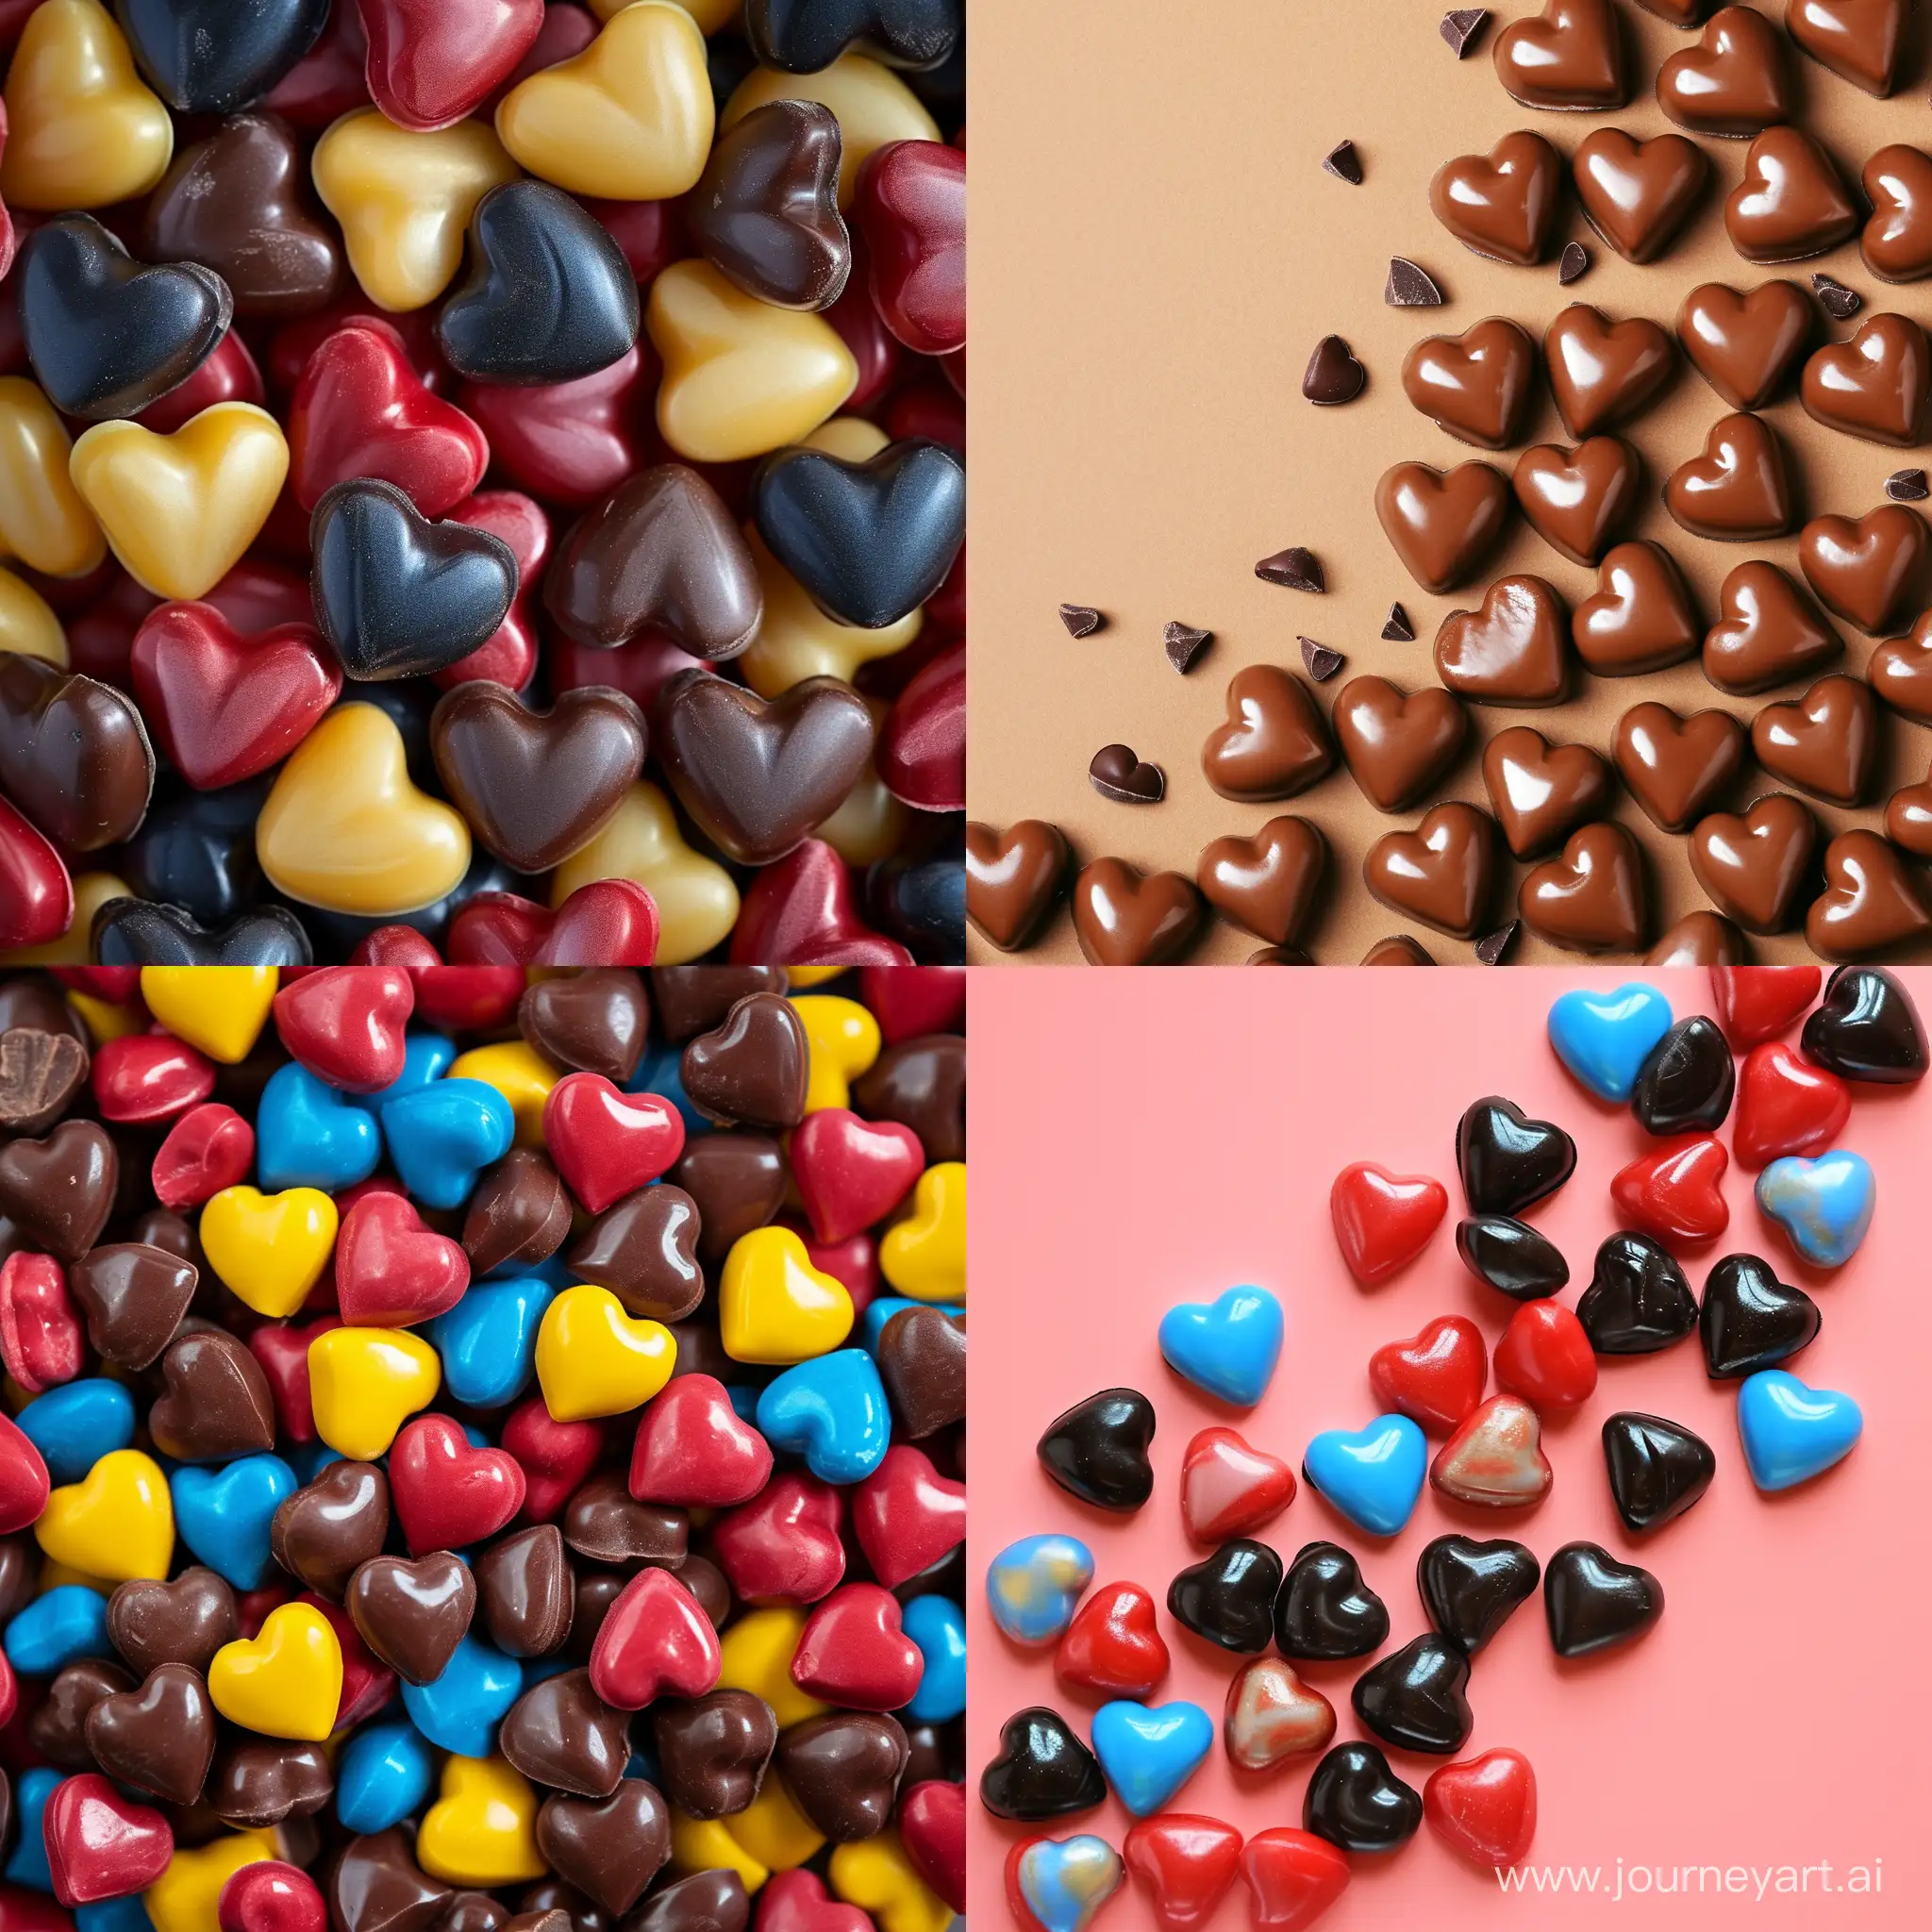 Choco-Hearts-Candies-on-Decorative-Background